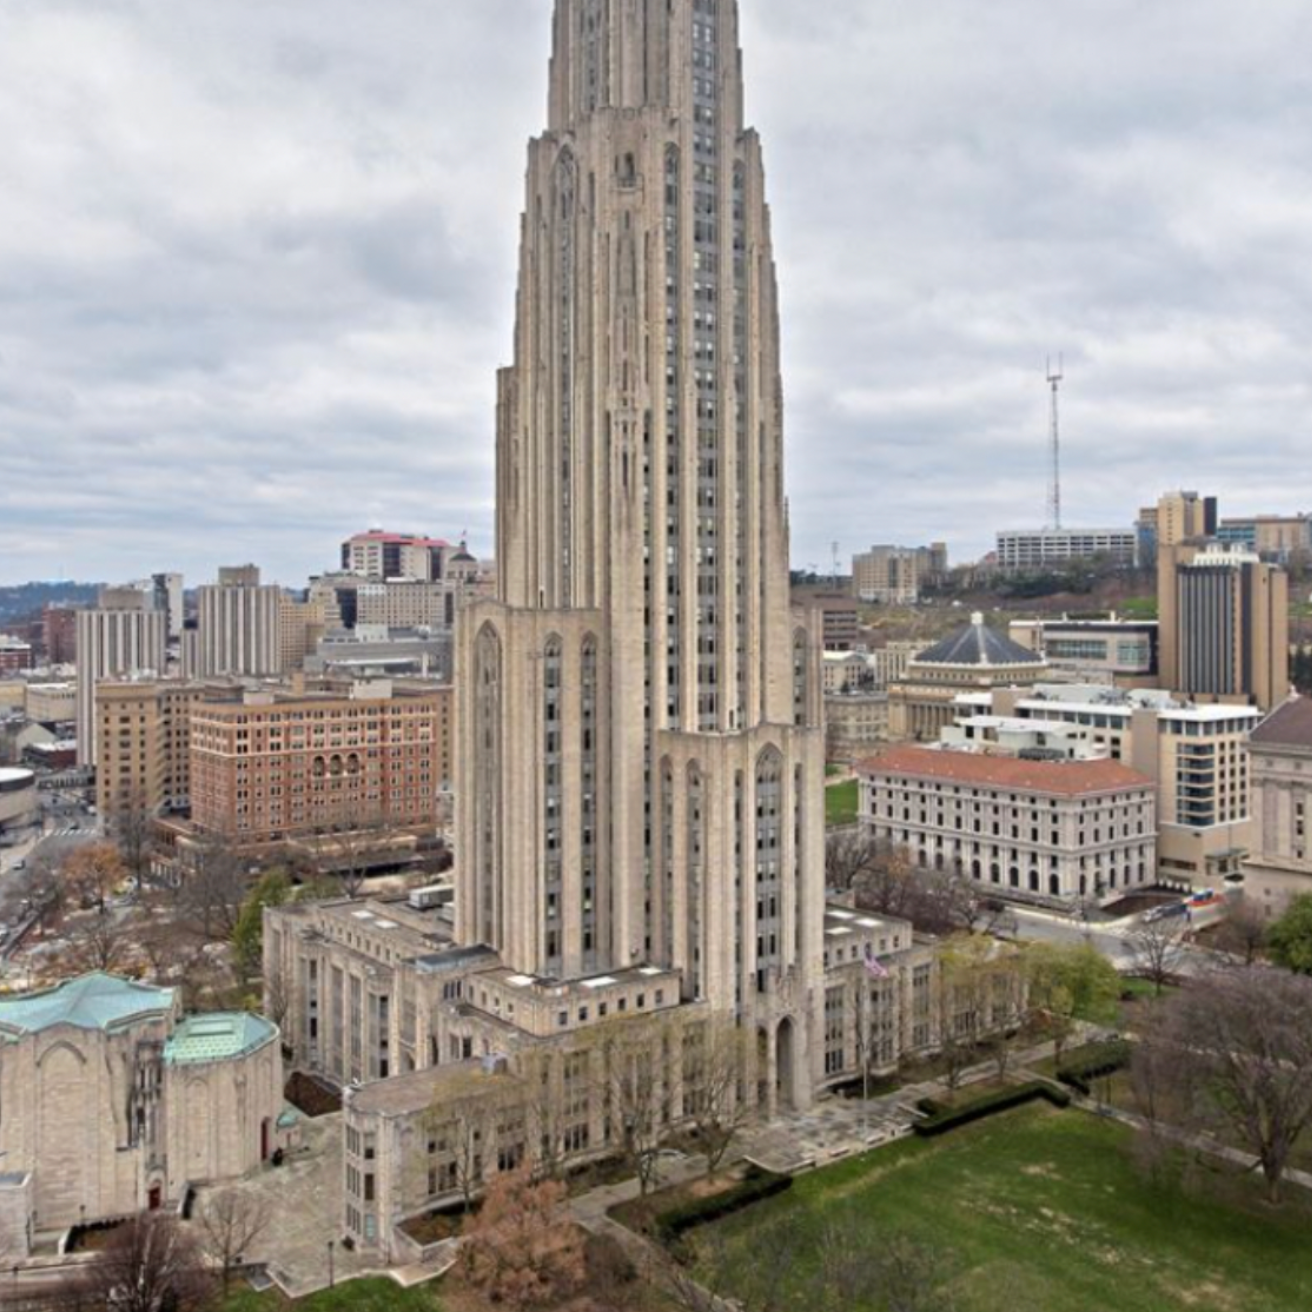 University of Pittsburgh campus